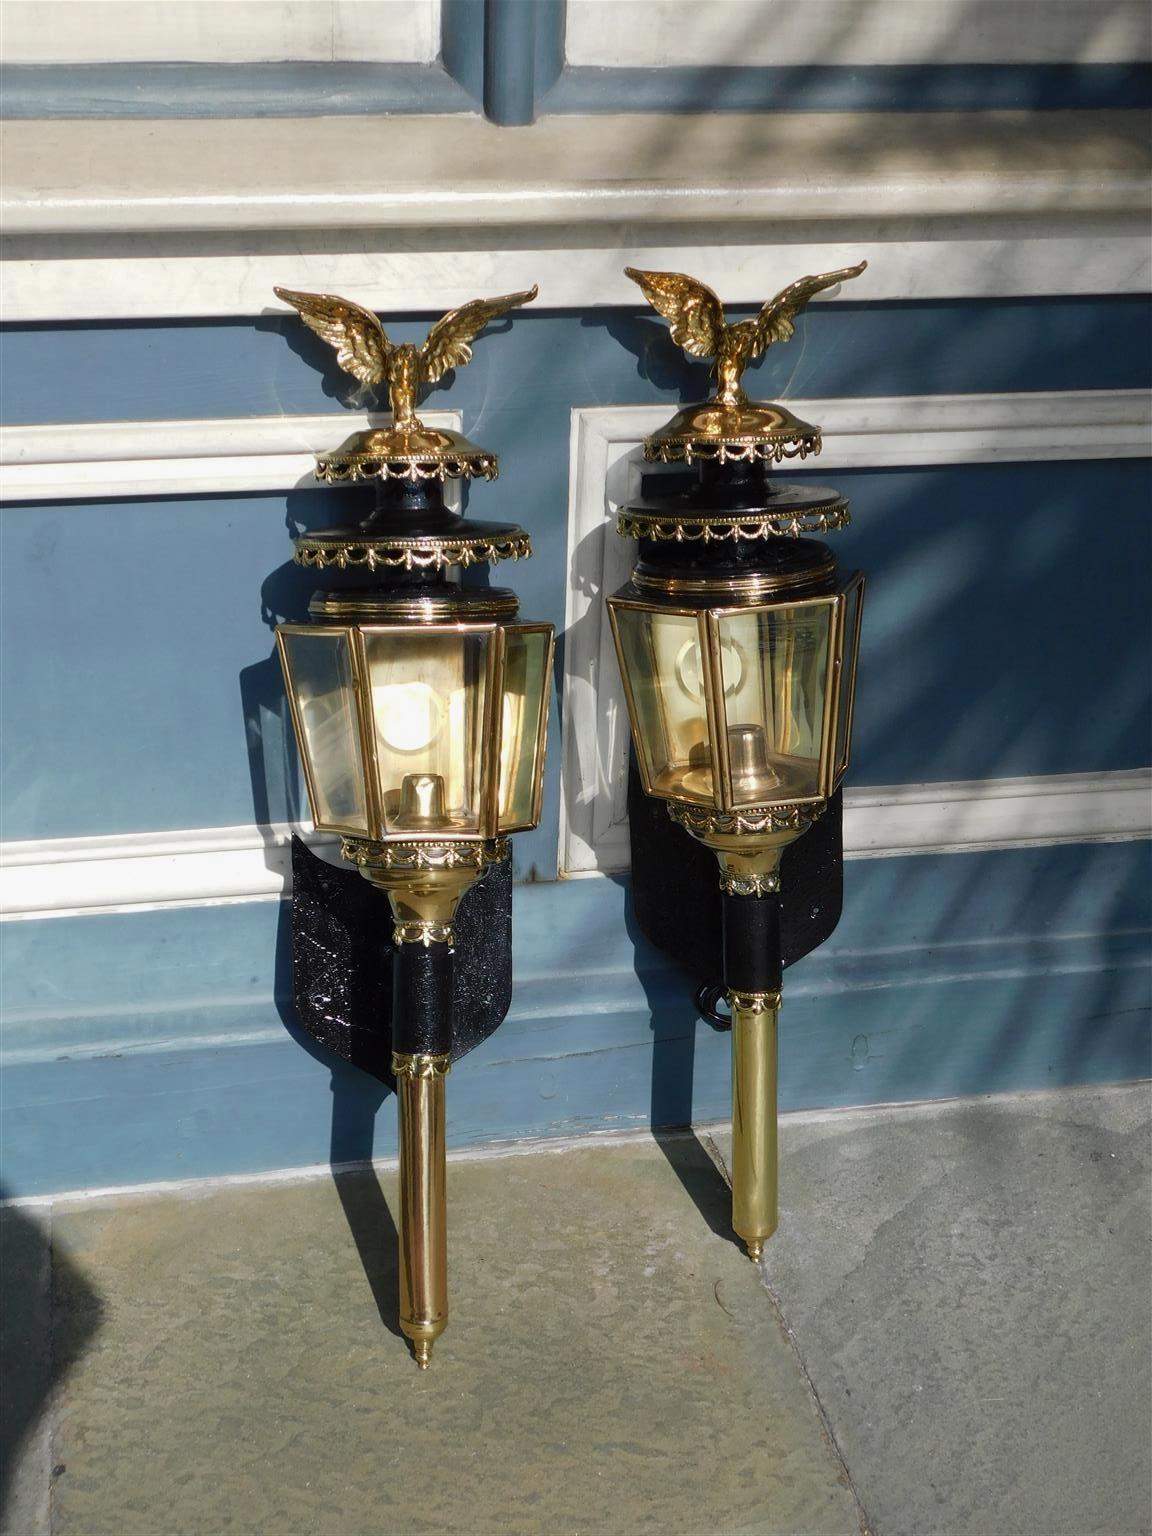 Pair of American brass coach lanterns with flanking eagle finials, decorative tiered beaded swags, original beveled glass, and mounted on cuffed shield back scrolled iron brackets. Mid 19th Century
Pair of lanterns have been lacquered for exterior